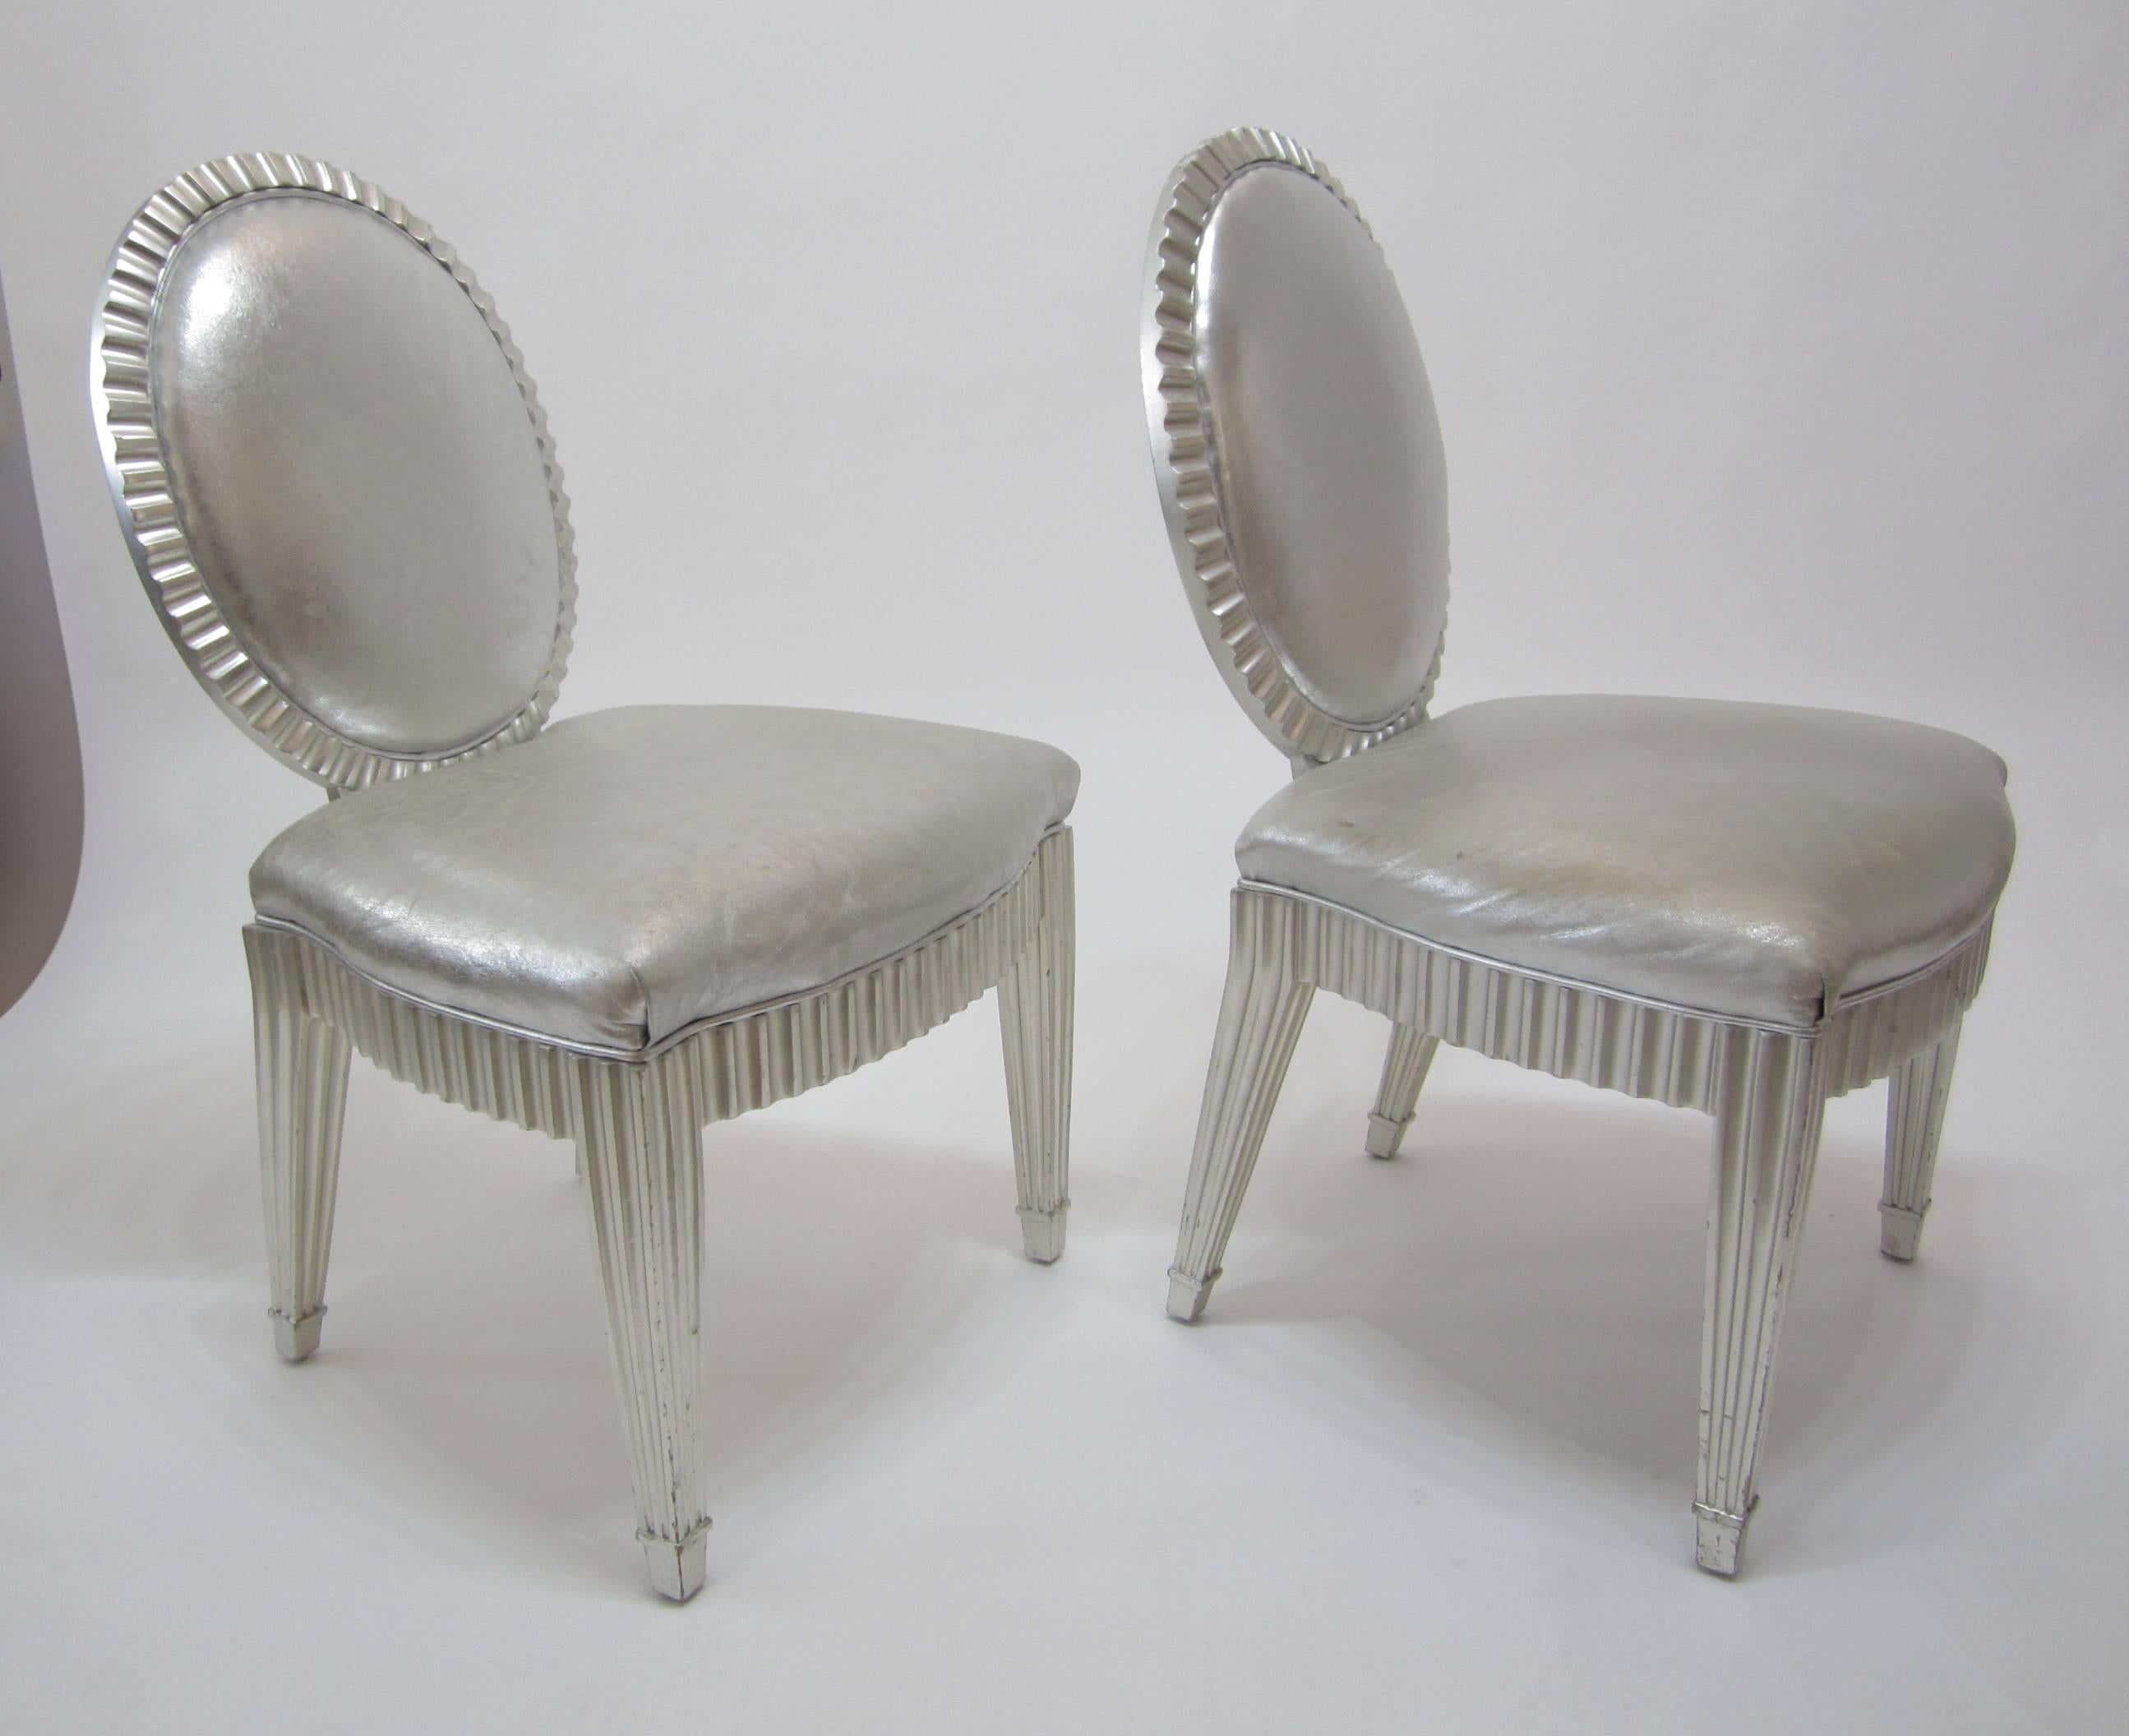 Late 20th Century Pair of Silver Leaf and Silver Metallic Leather Neoclassical Chairs by Donghia